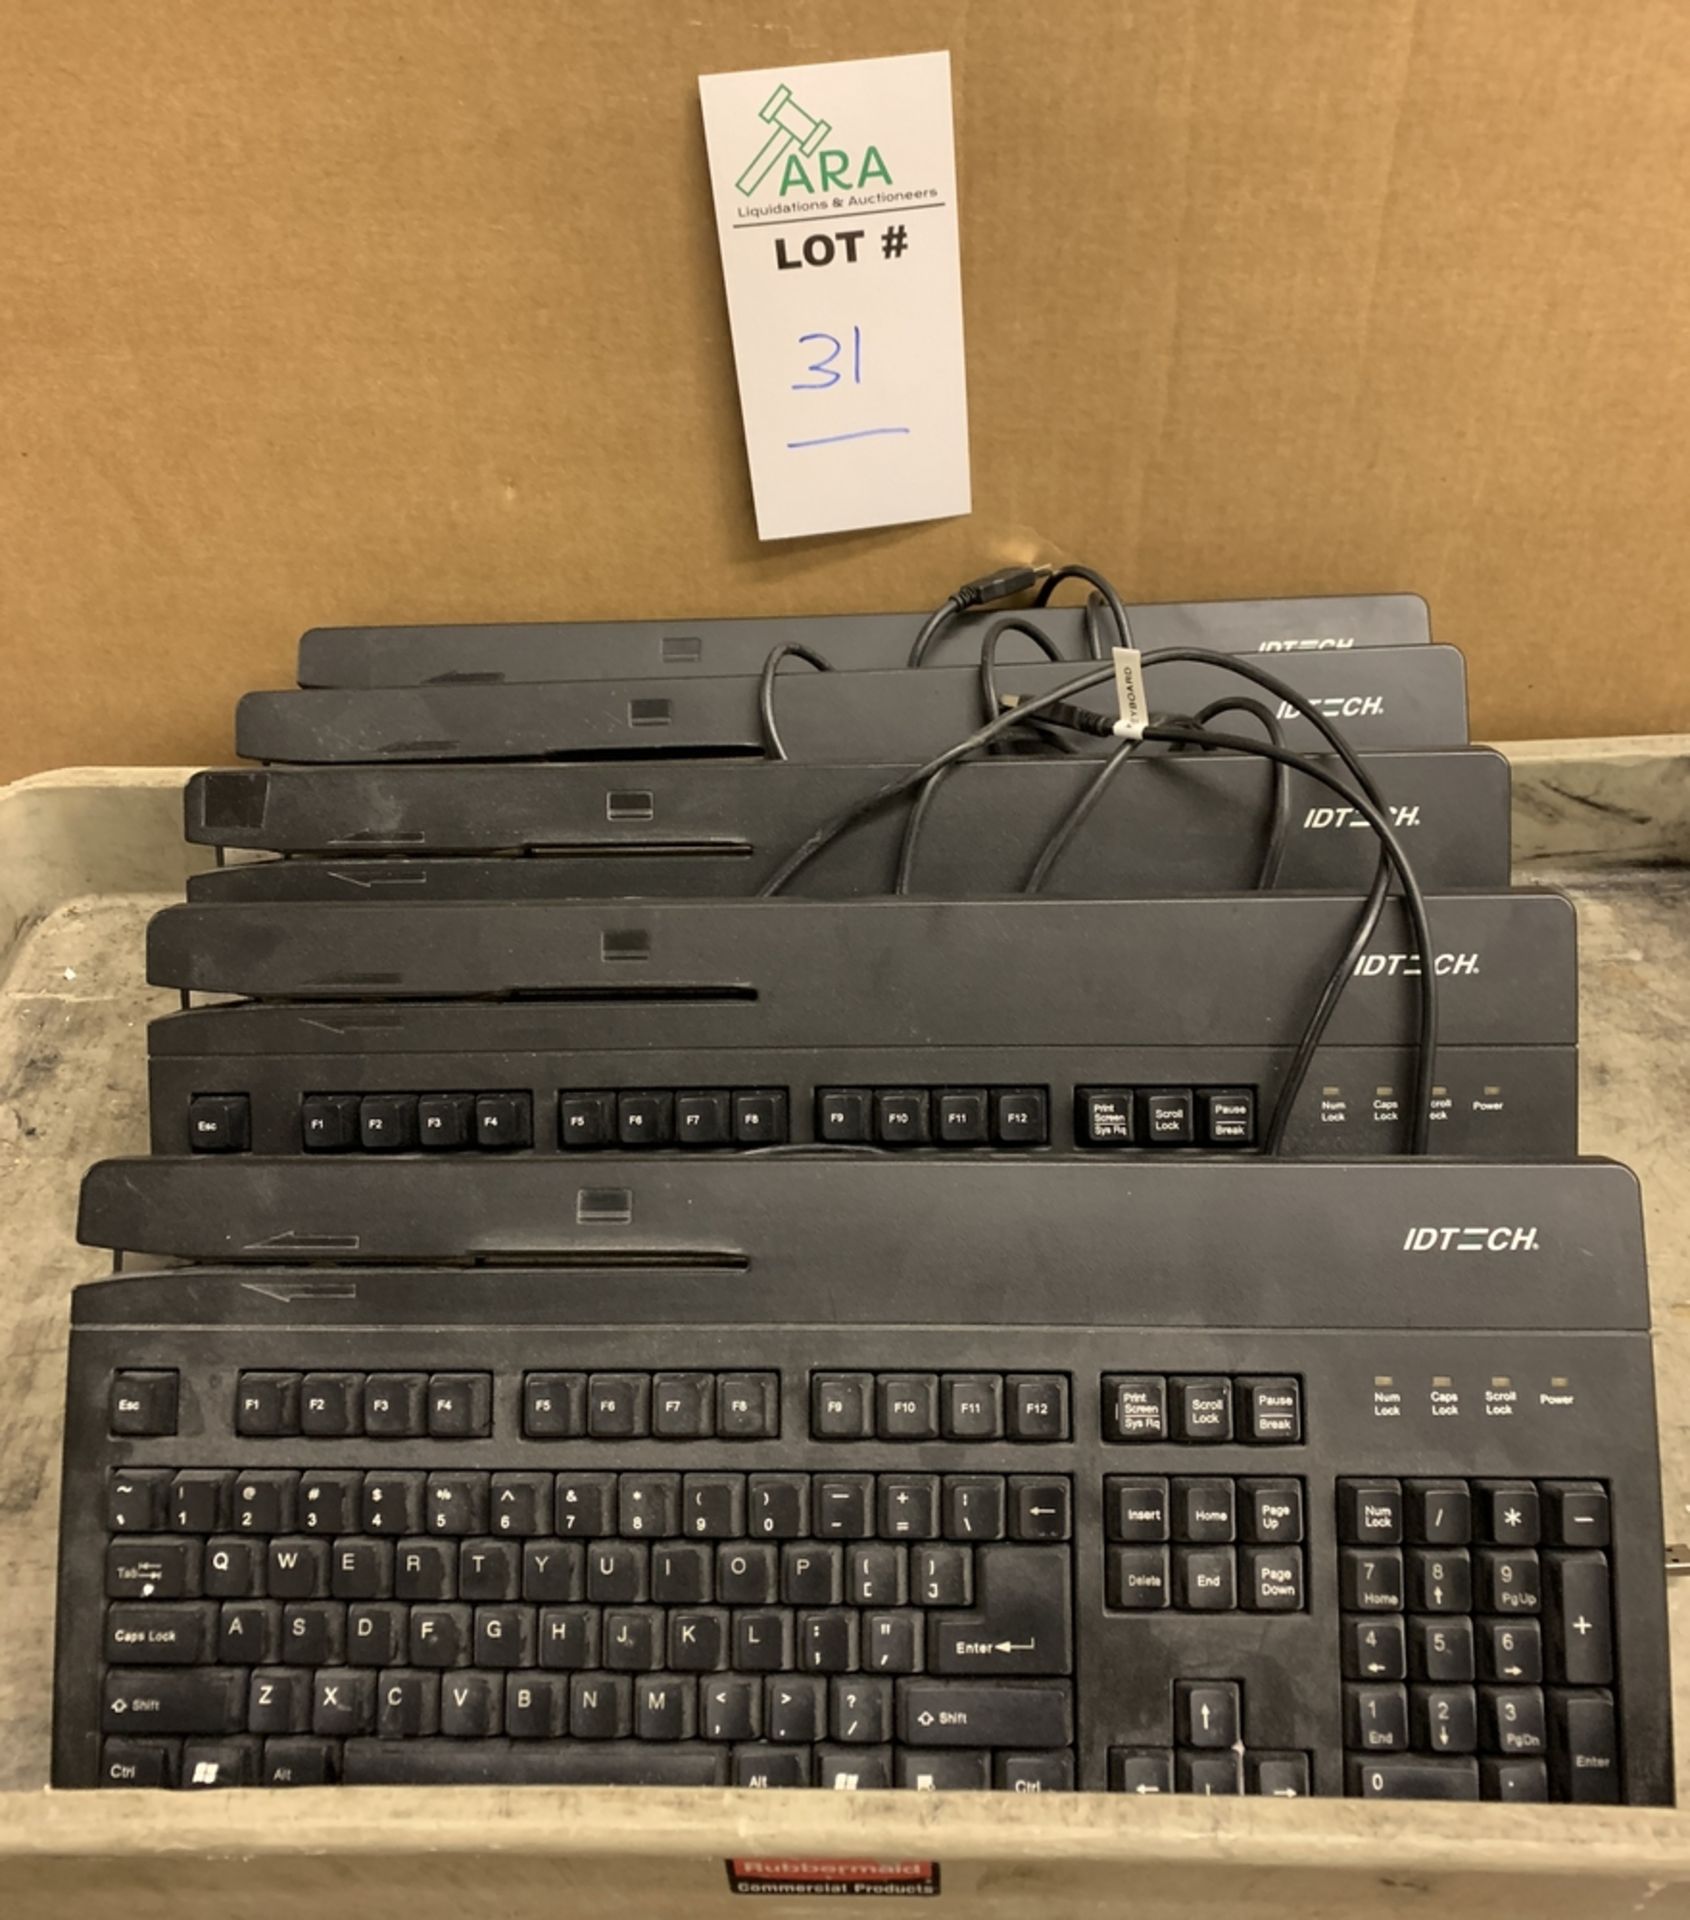 5 X IDTECH KEYBOARDS WITH CARD SWIPE THESE ARE $150 A KEYBOARD RETAIL ALL ITEMS ARE SOLD AS IS